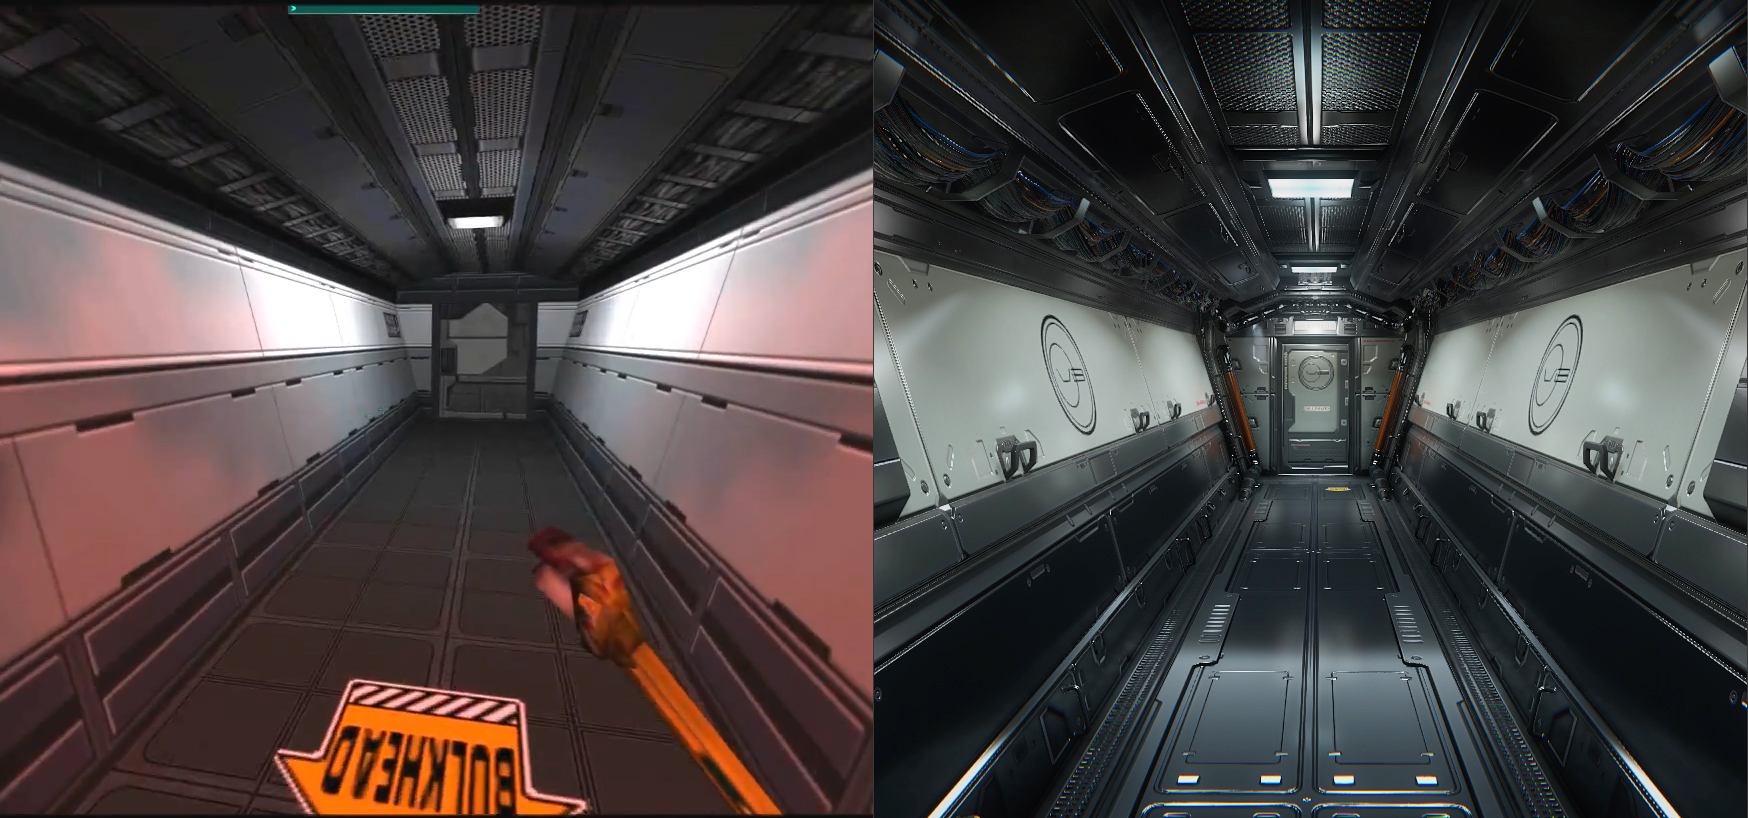 System Shock 2 Backgrounds, Compatible - PC, Mobile, Gadgets| 1748x818 px